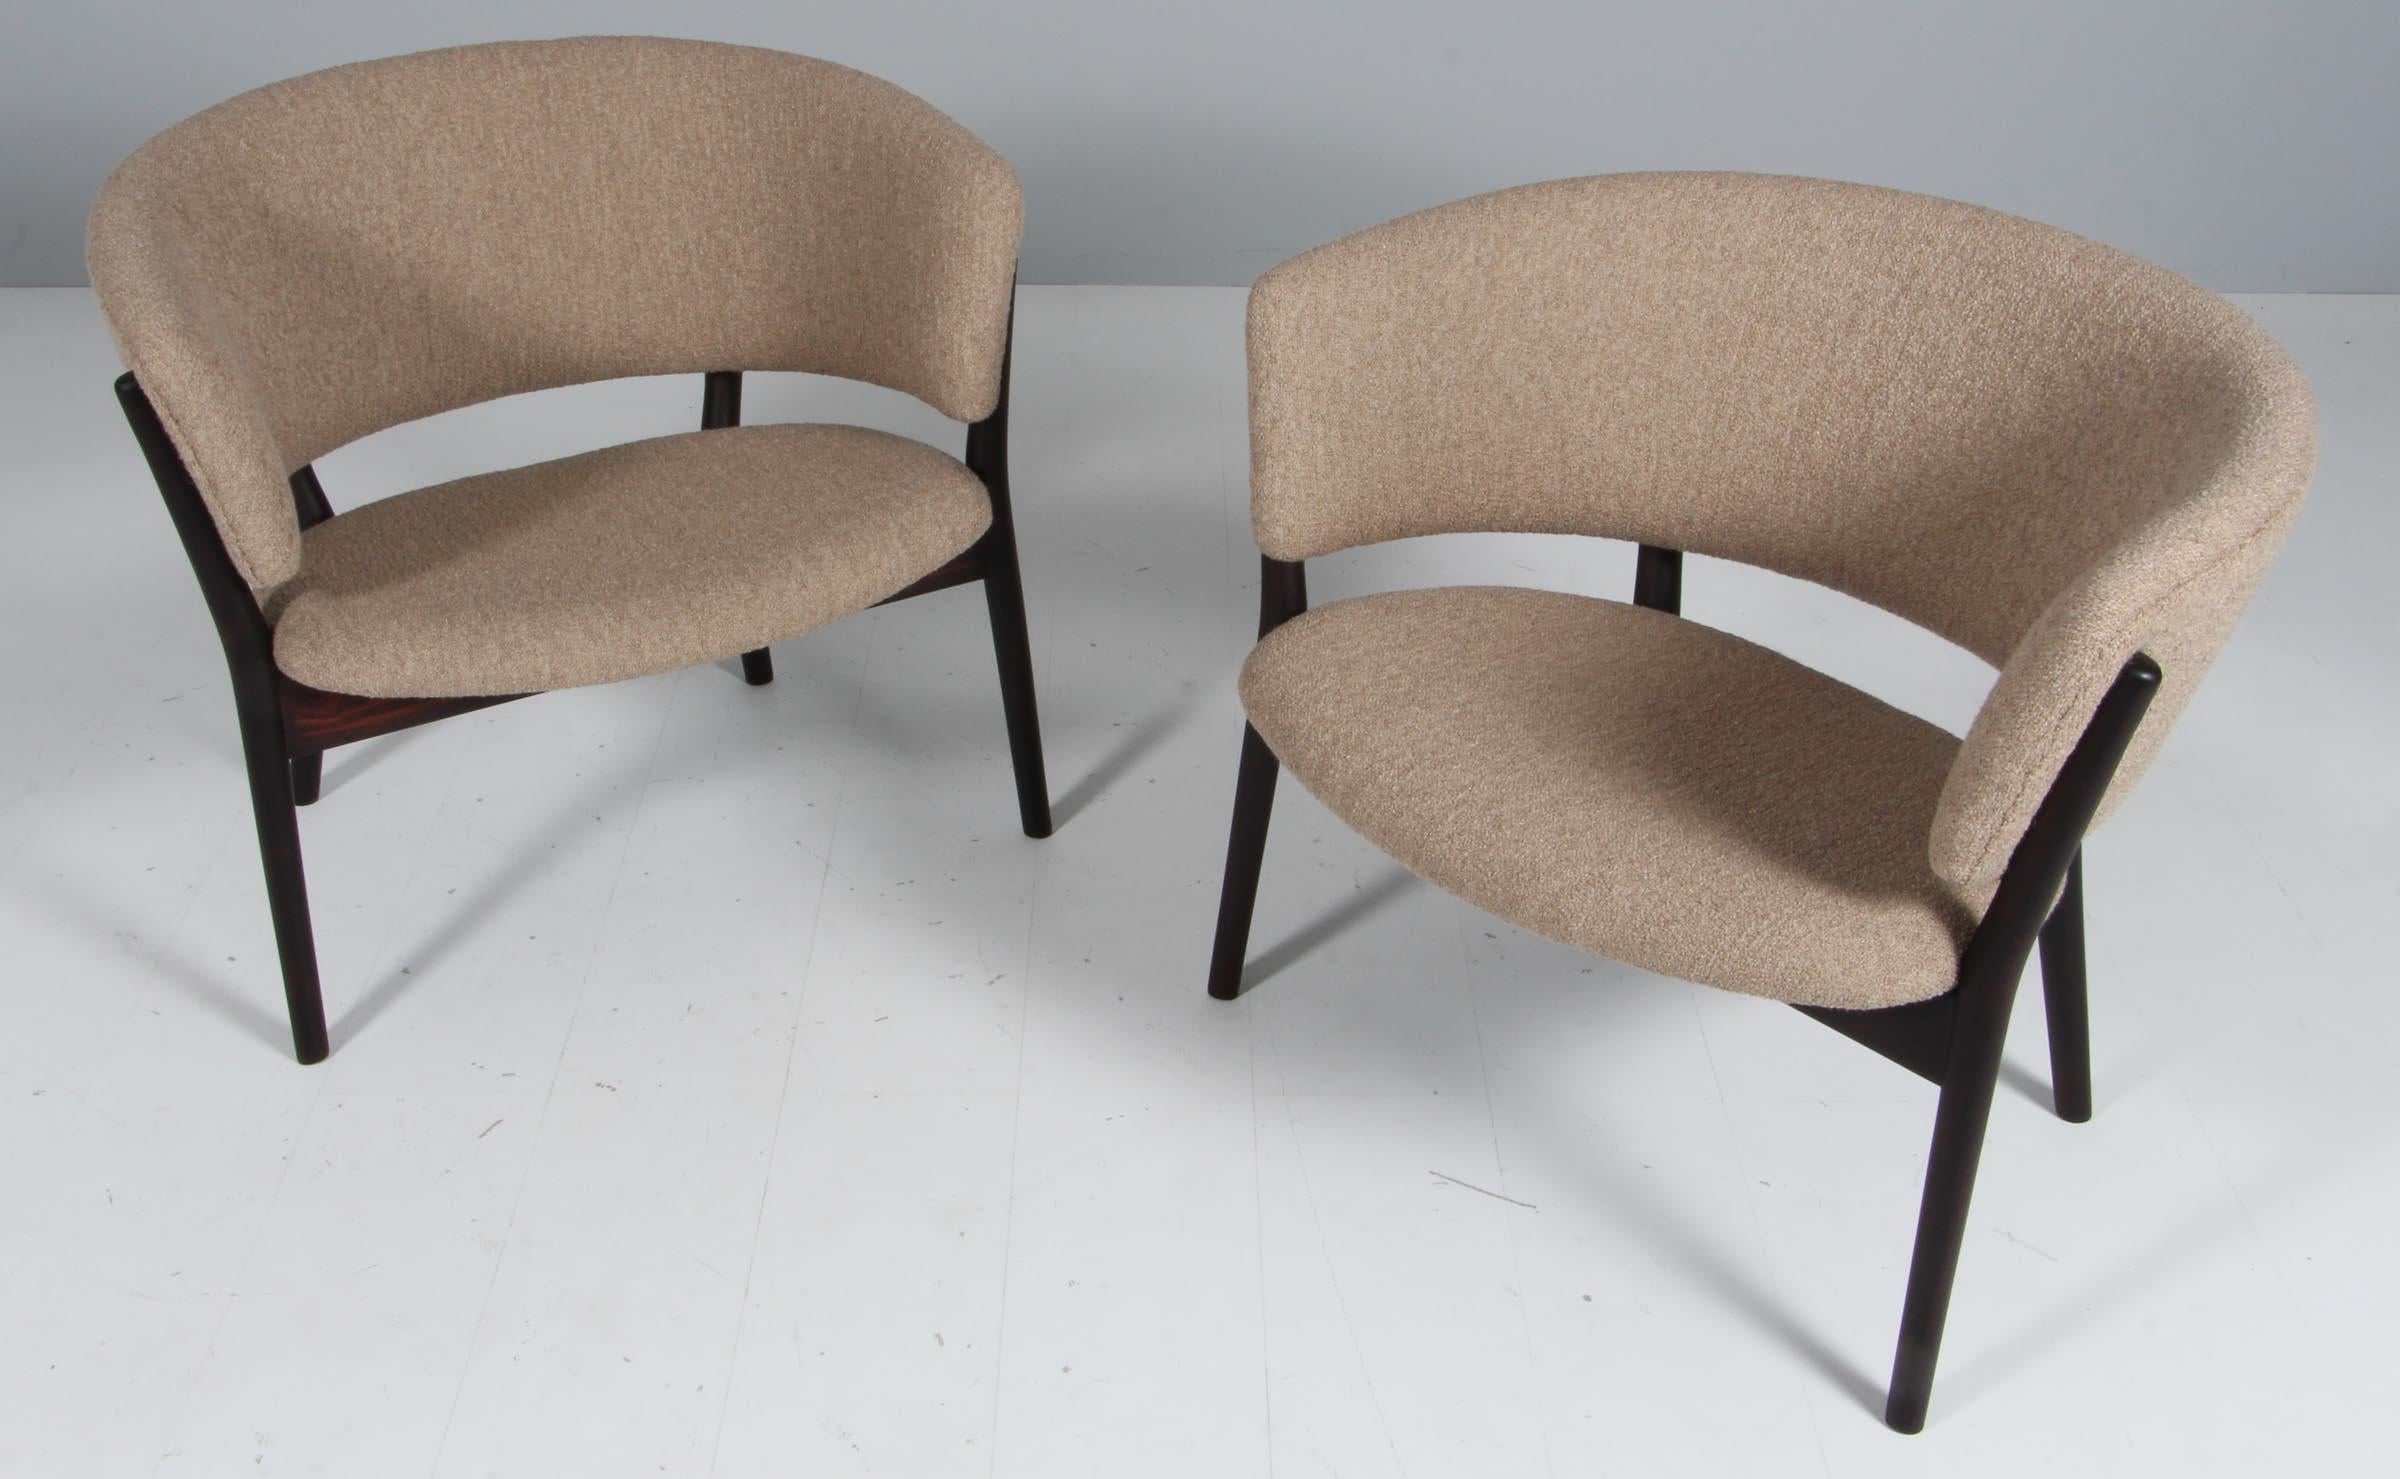 Nanna Ditzel for Soren Willadsen, easy chairs model 'SW83', rosewood, new upholstered with Boucle, Denmark, 1952.

Set of two round lounge chairs with a dark rosewood wooden frame and boucle. The wooden frame is beautifully shaped and gives the